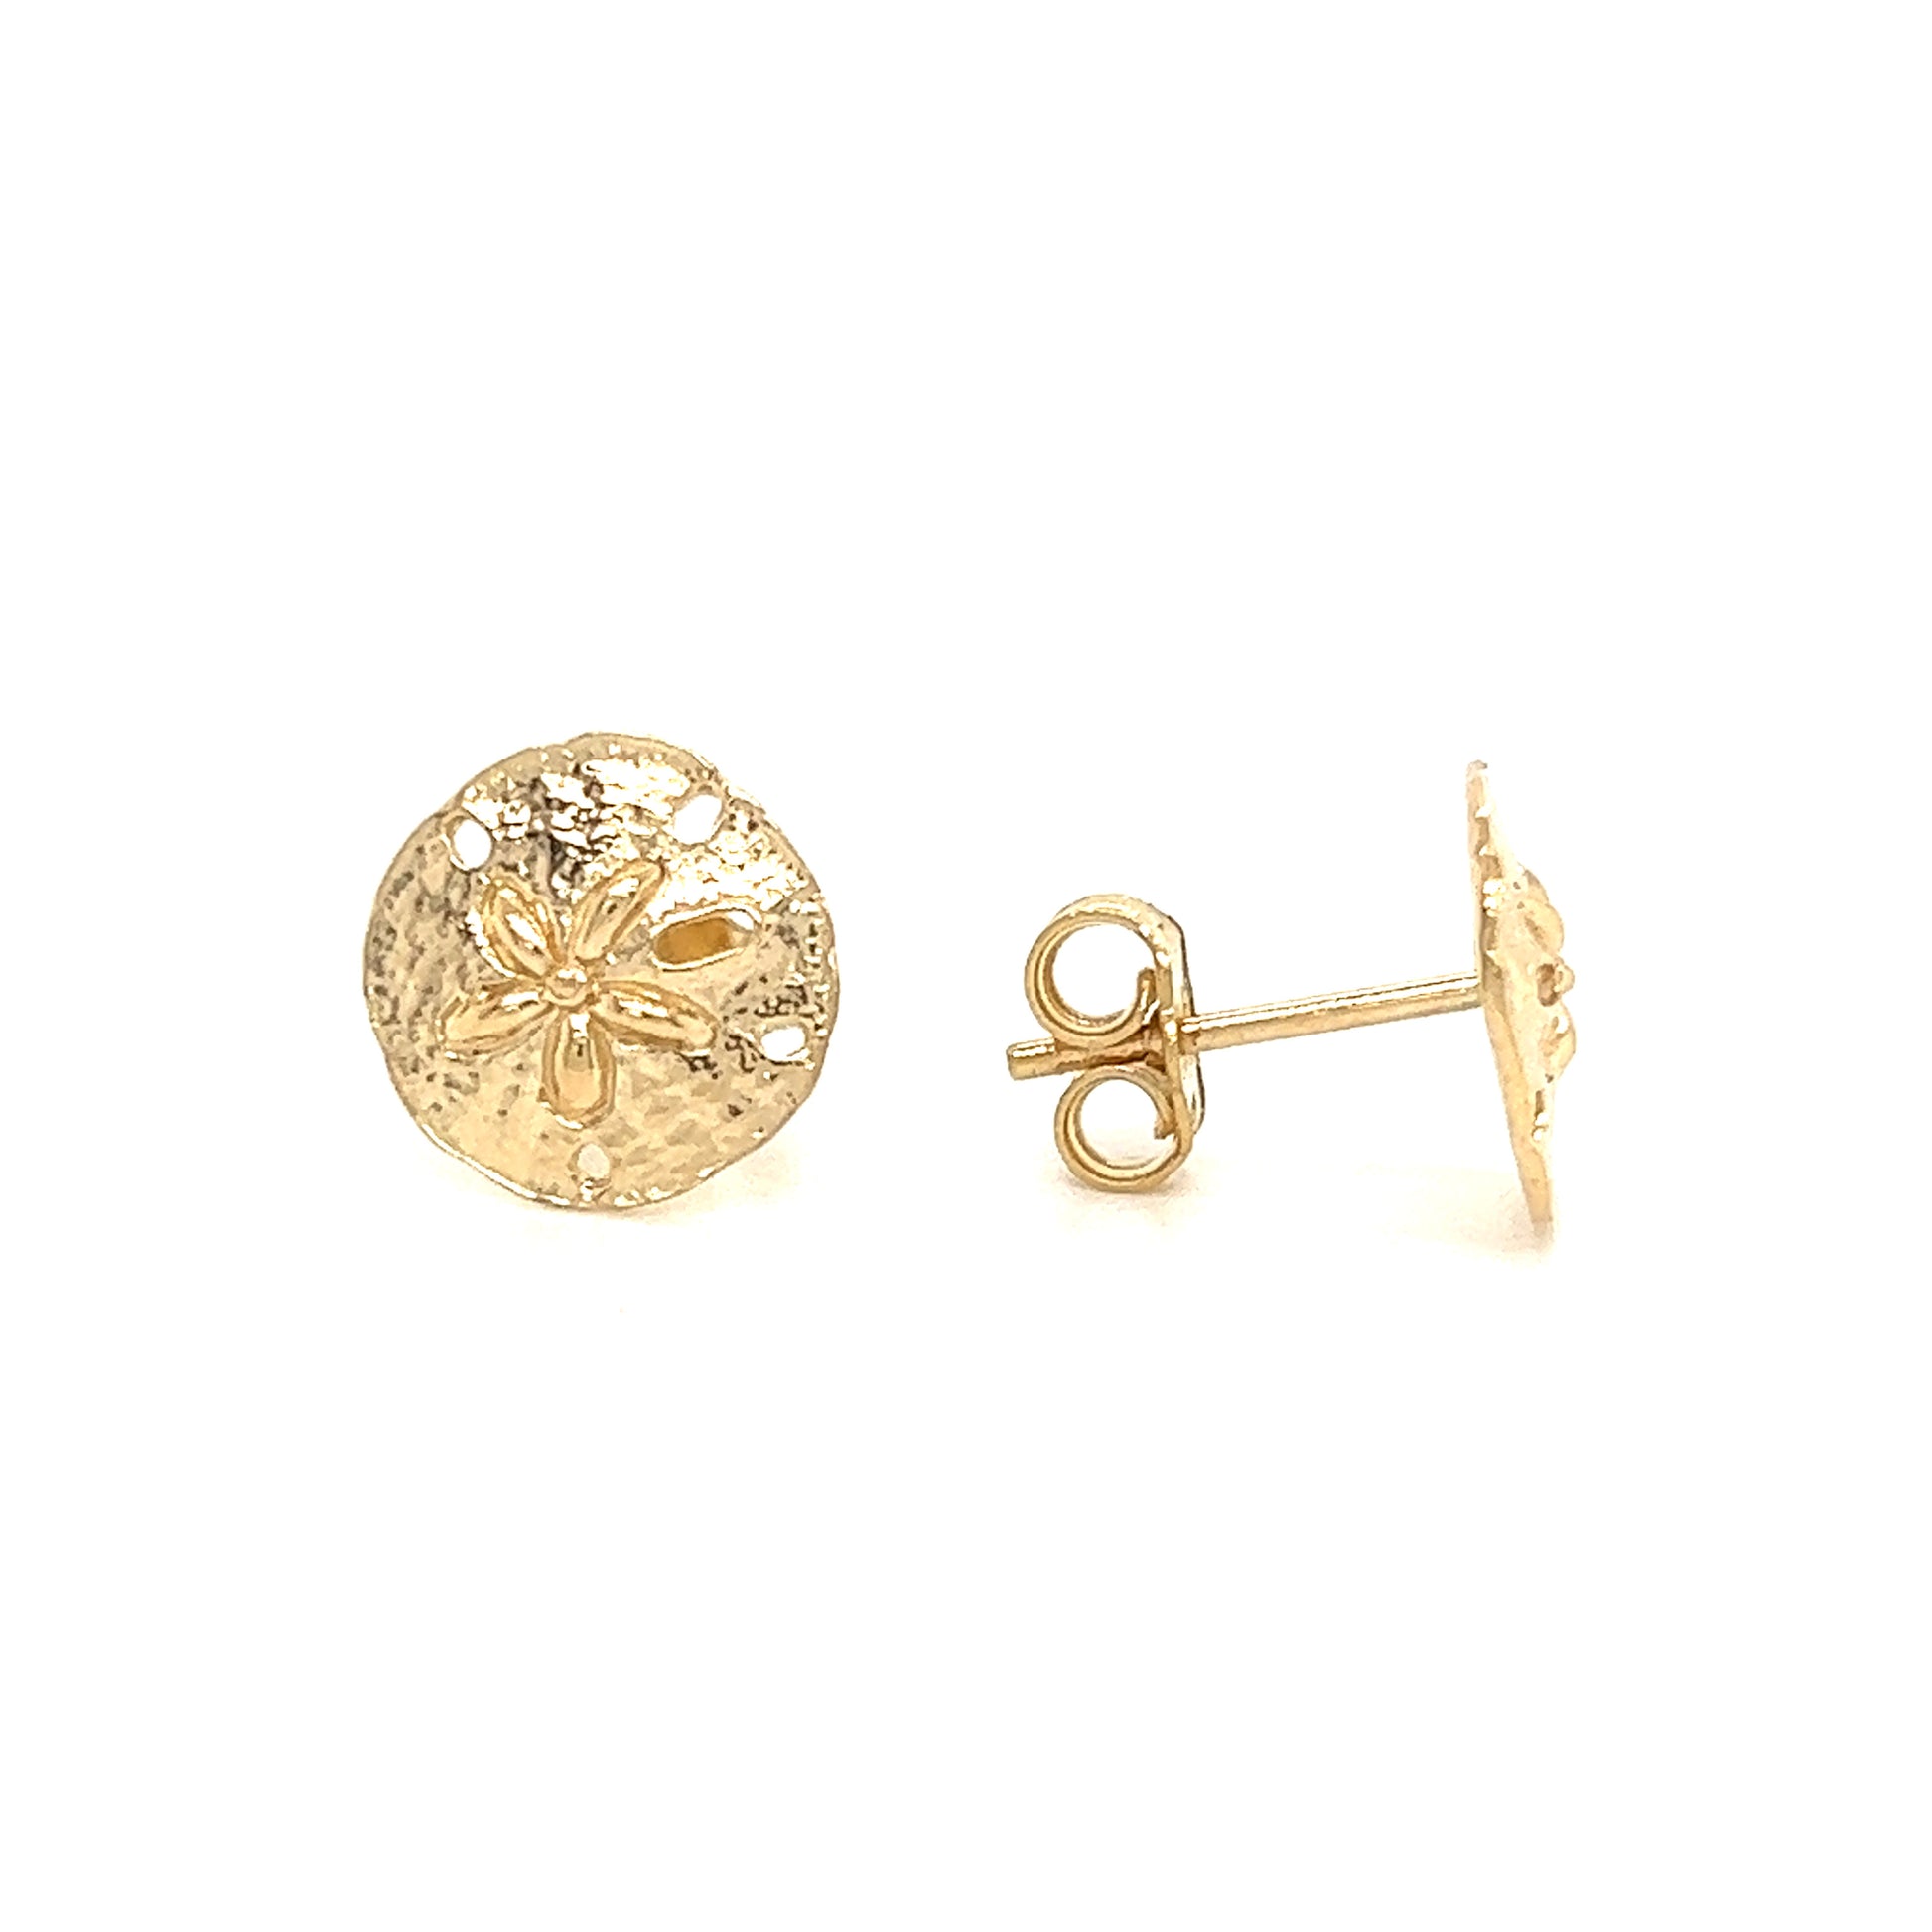 Sand Dollar Stud Earrings in 14K Yellow Gold Front and Side View